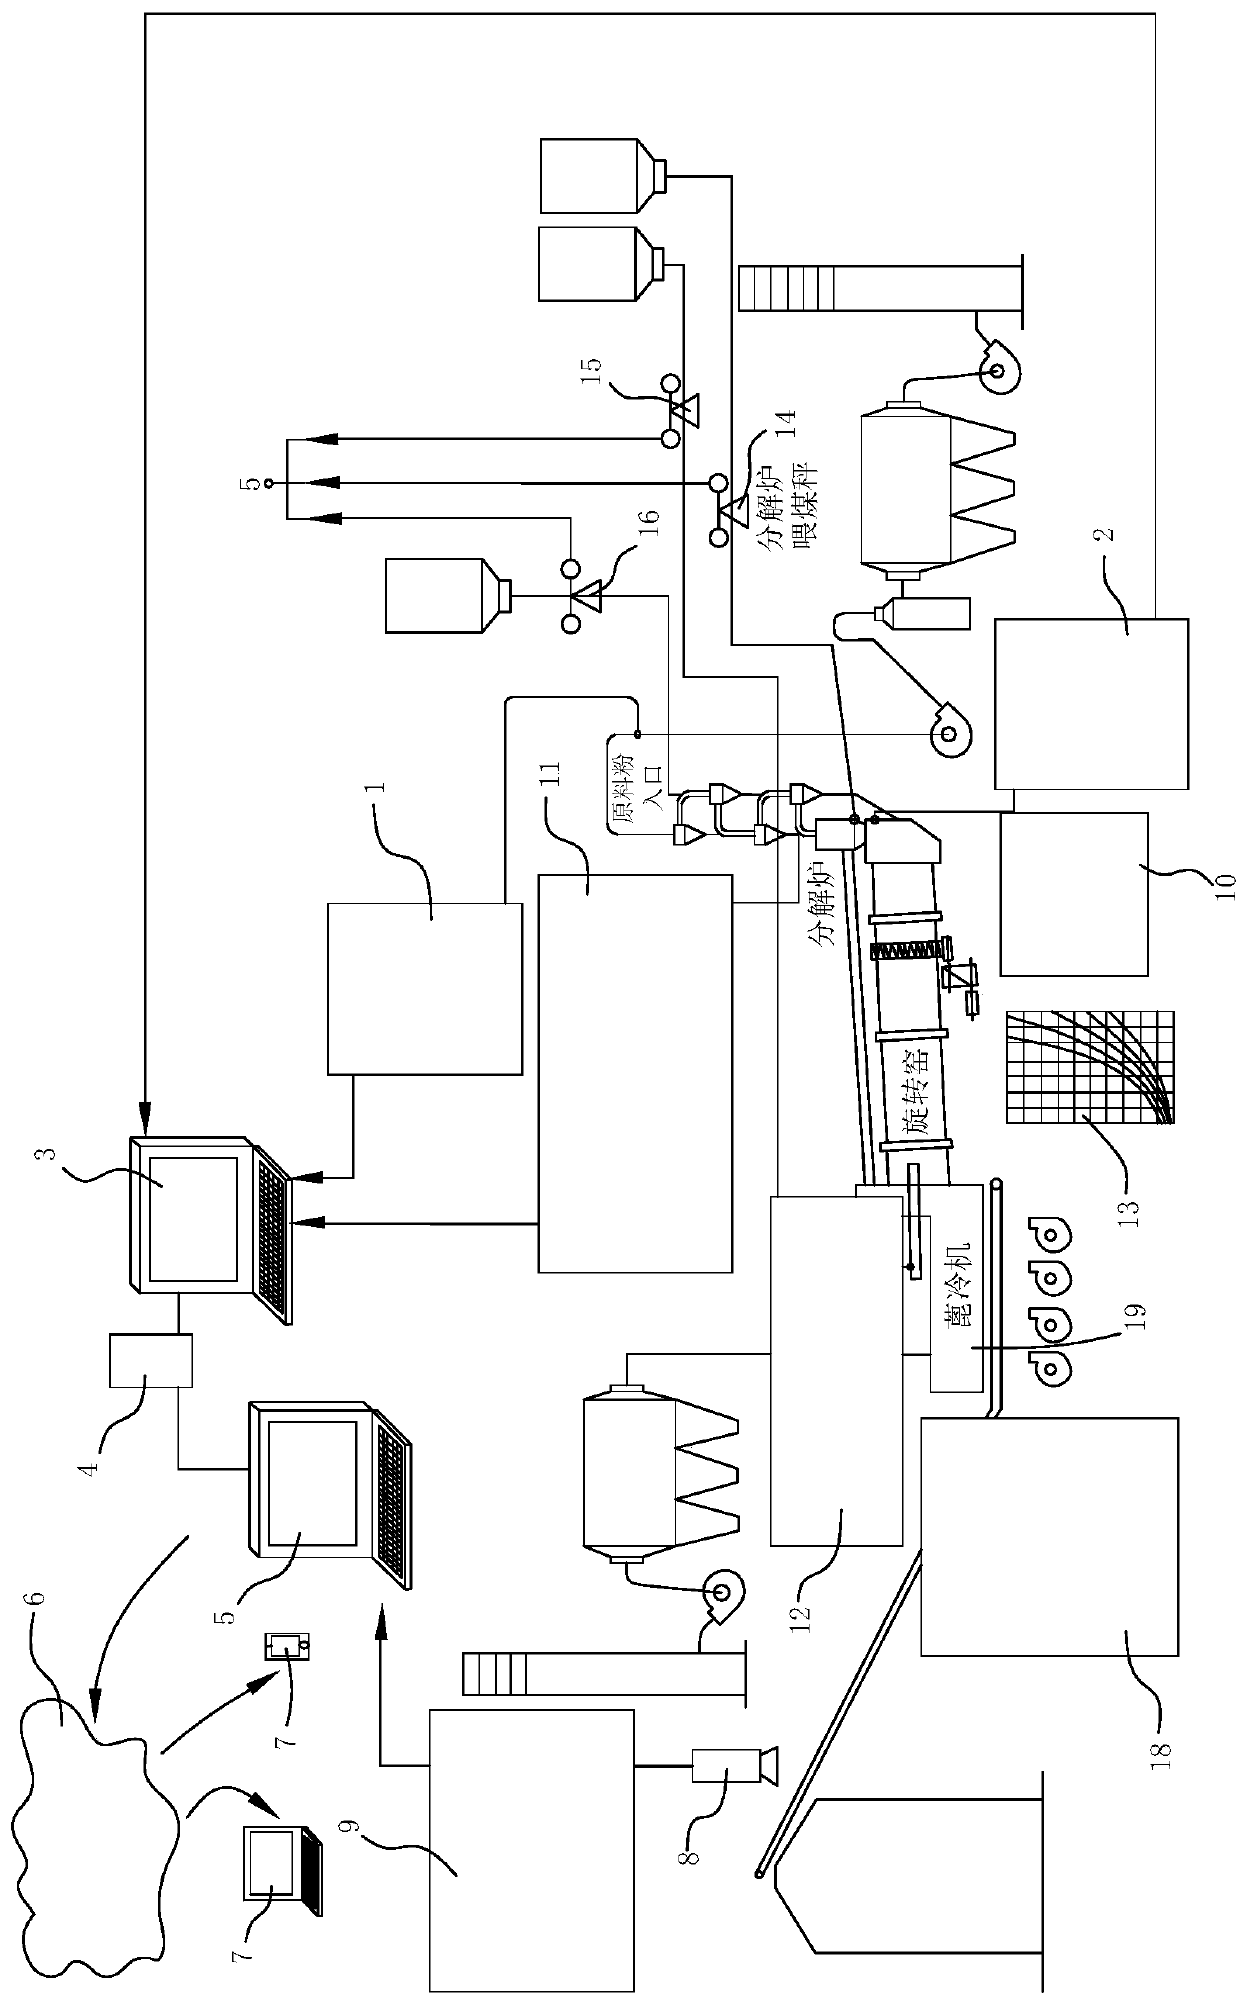 Fine management system and method for optimizing cement clinker production process